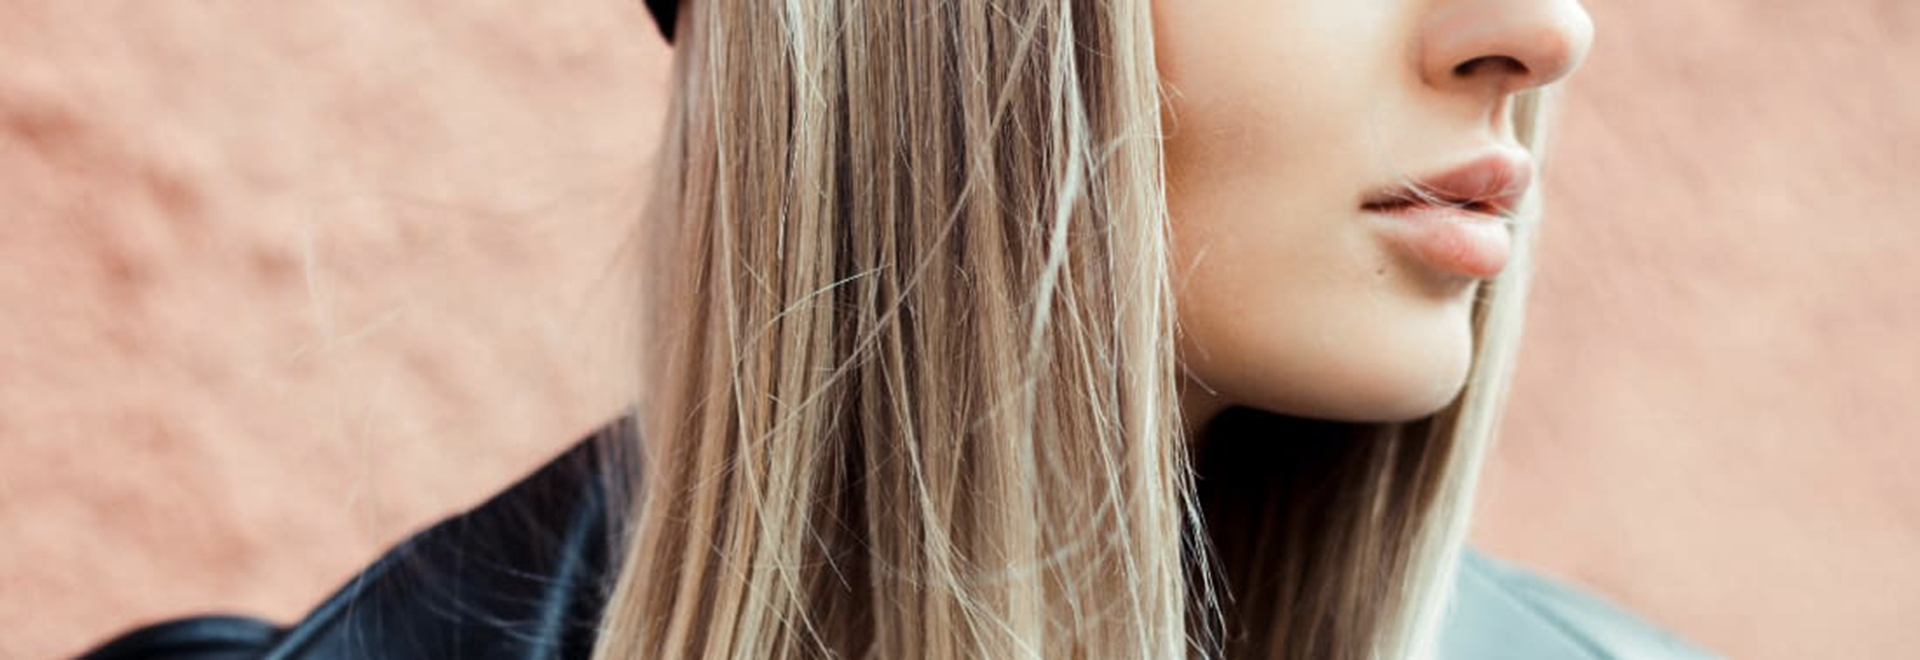 A photo of half of woman's face who has long blonde straight hair